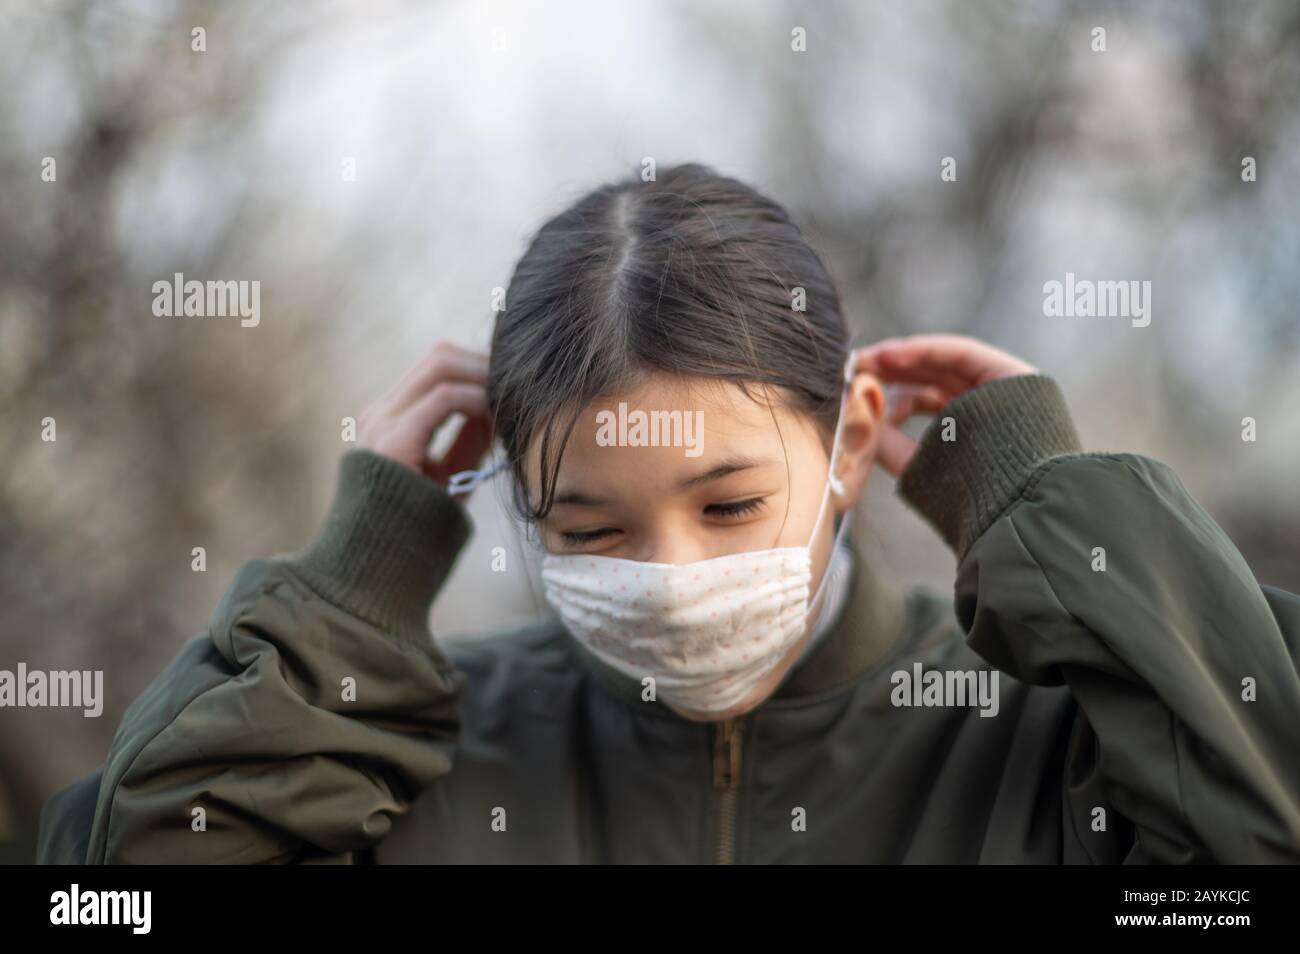 Young girl /child of mixed Asian -European ethnicity putting on a face mask to avoid virus / allergy. Close up outdoor shot during Covid-19. Stock Photo